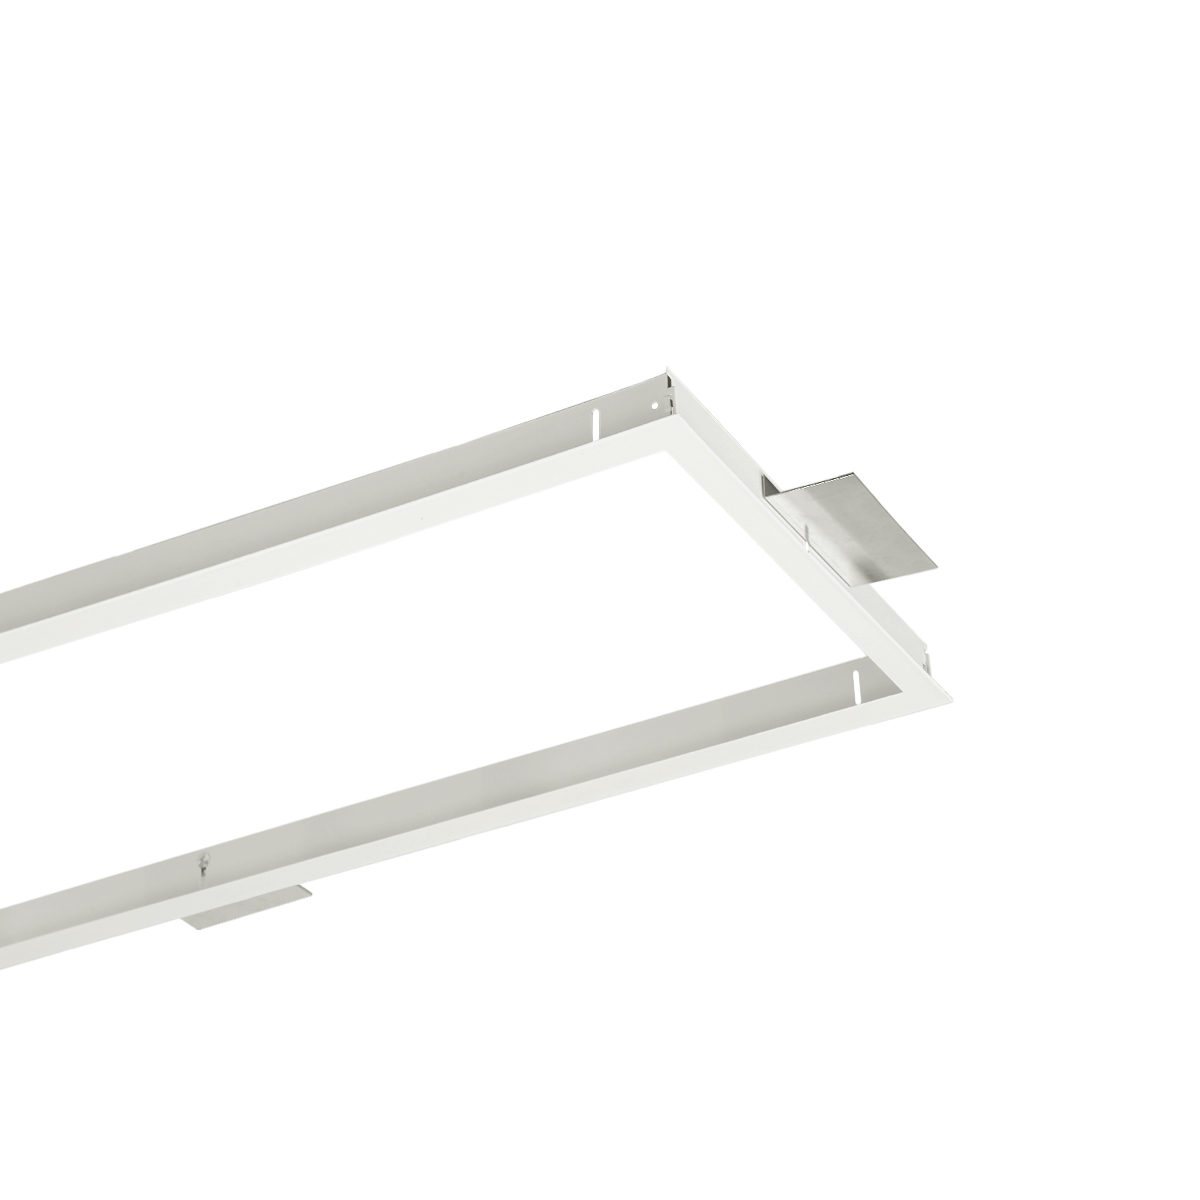 RECESSED FRAME UNIVERSAL 600X600